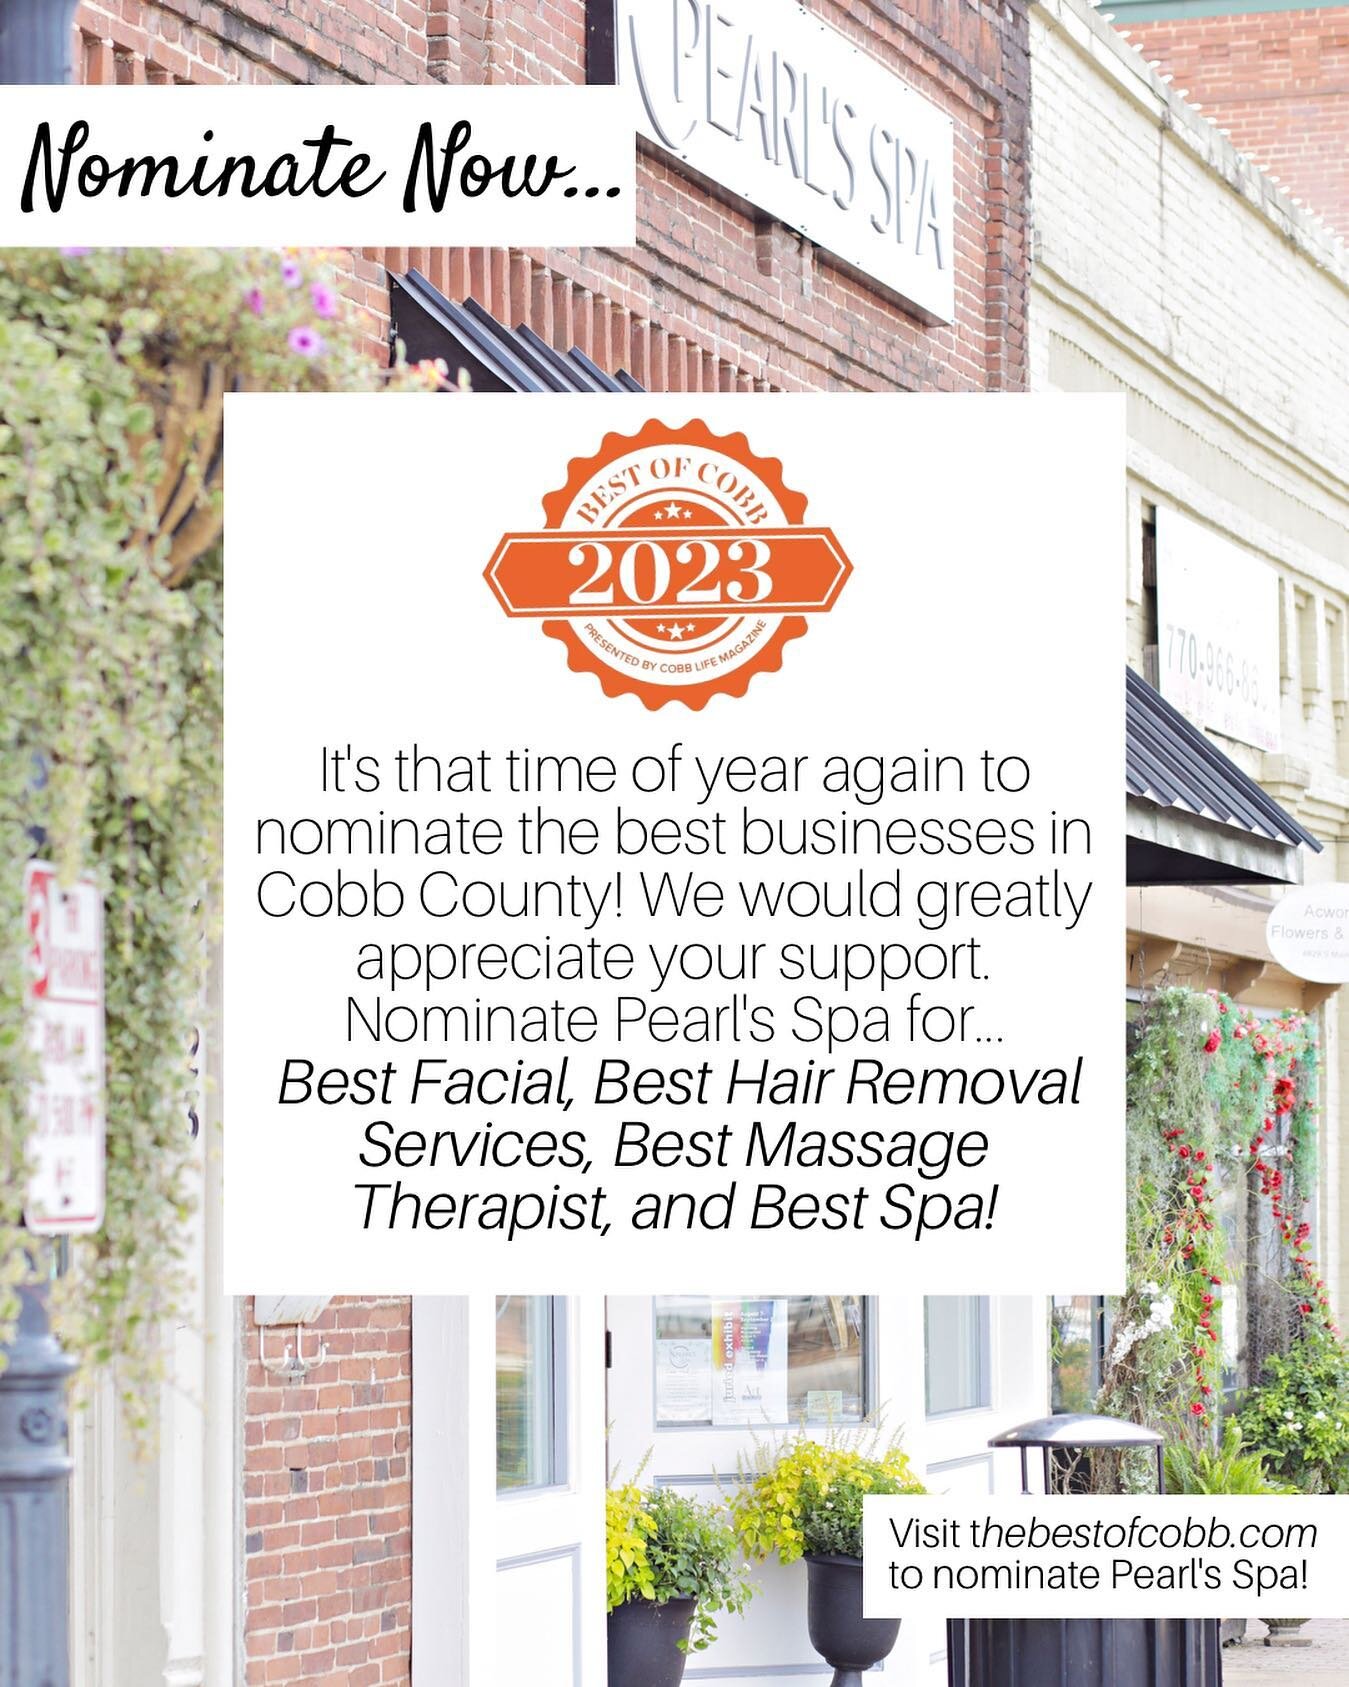 Best of Cobb Nomination season has begun! 

We care so much about each our guests, and we would really appreciate your support! To support Pearl&rsquo;s Spa, you can nominate us for Best Facial, Best Hair Removal Services, Best Massage Therapist, and